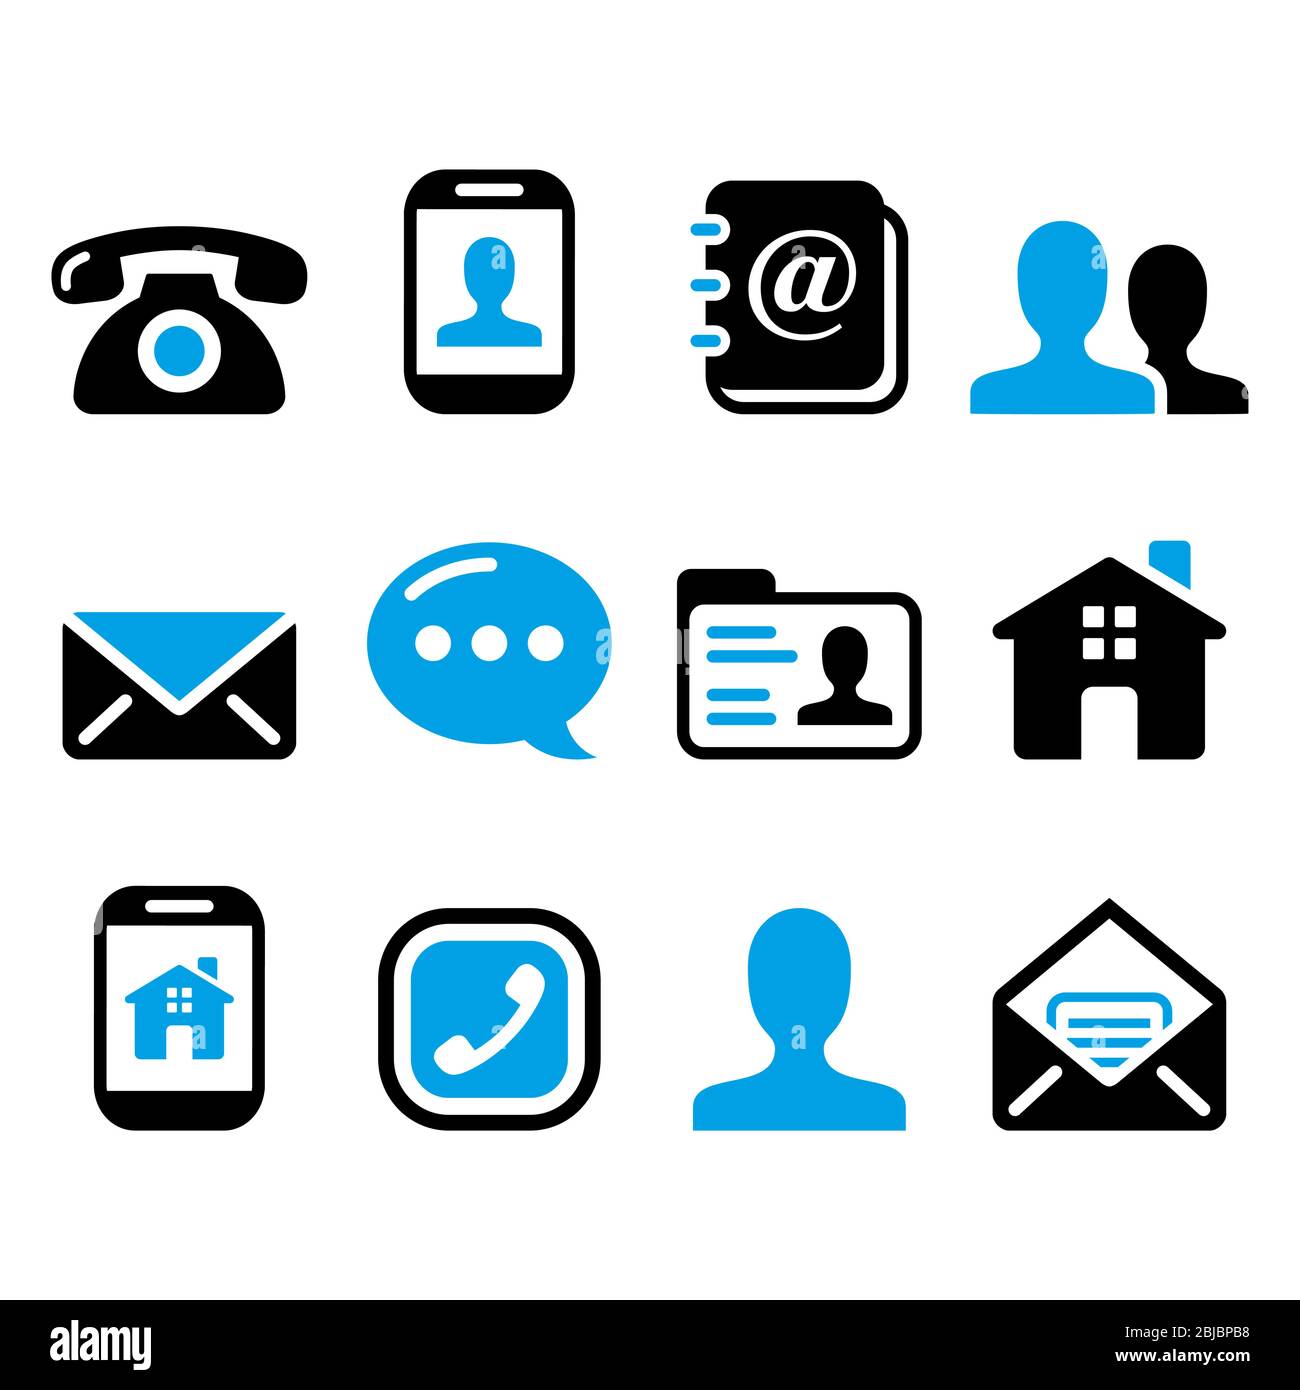 Contact vector icons set - mobile, user, email, smartphone, phone design collection Stock Vector